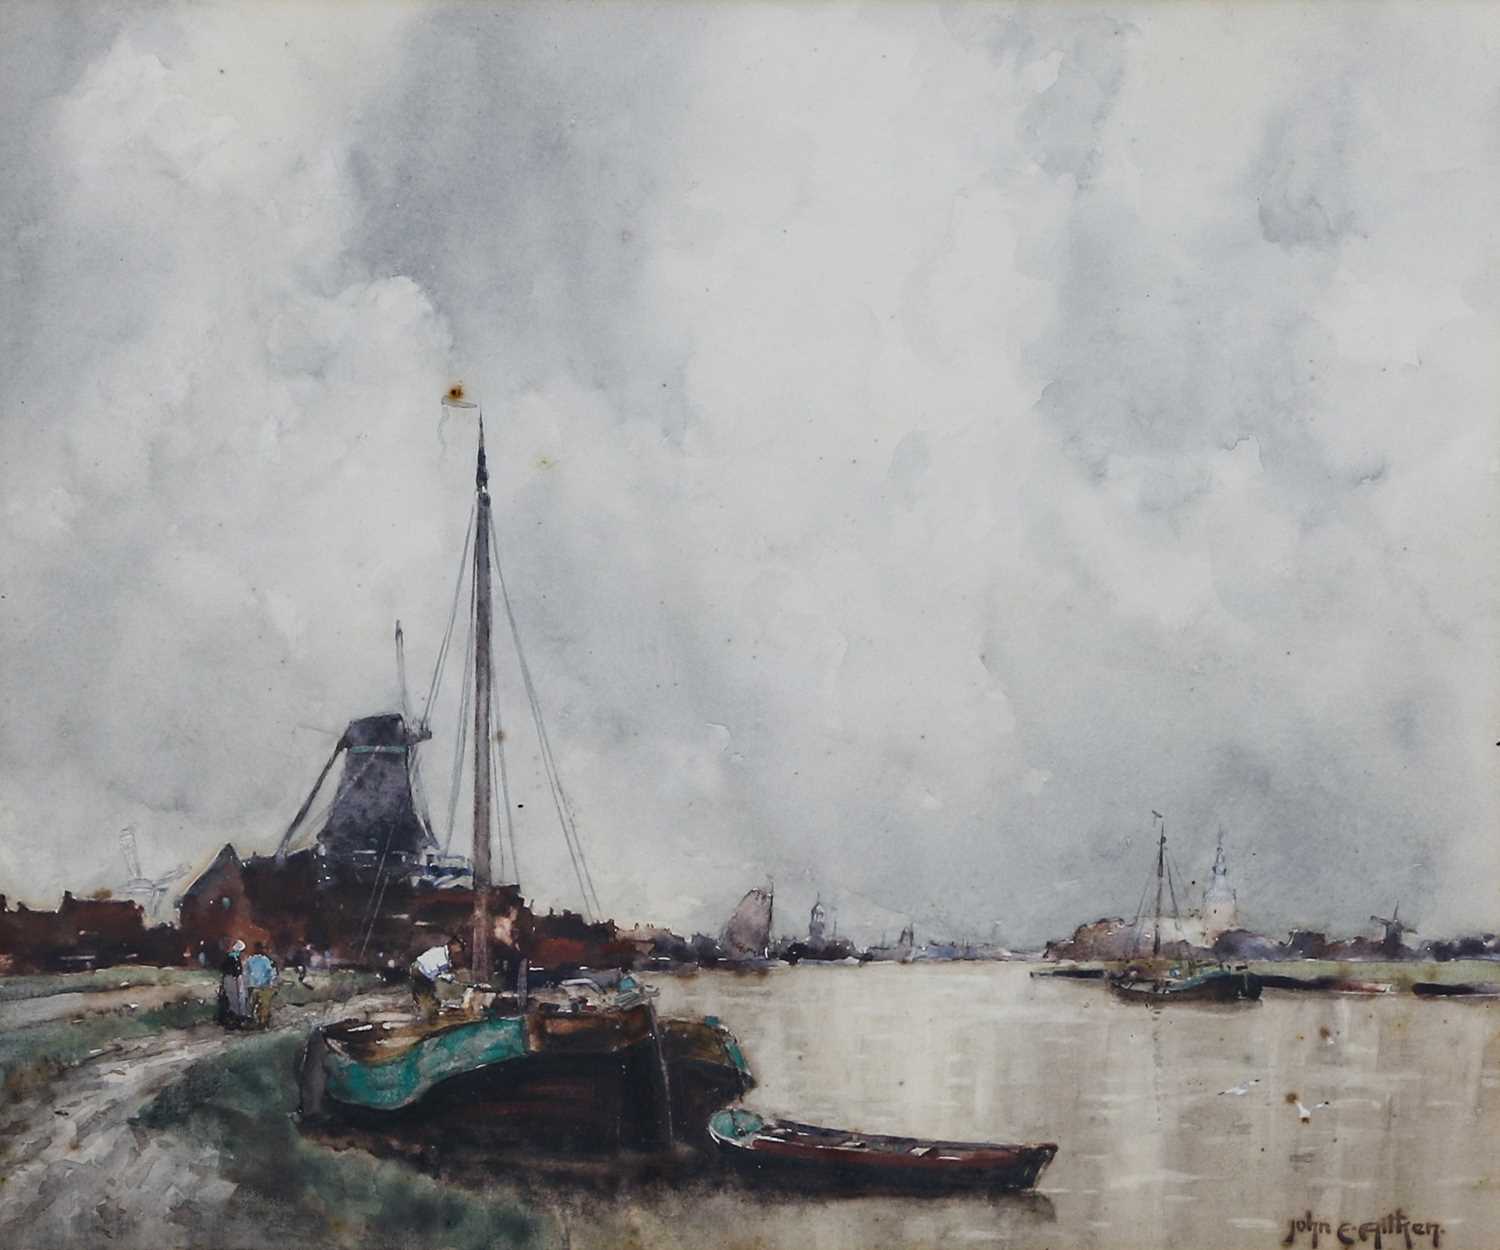 John Ernest Aitken (1881-1957)River scene with barges and windmills Signed, watercolour, 36.5cm by